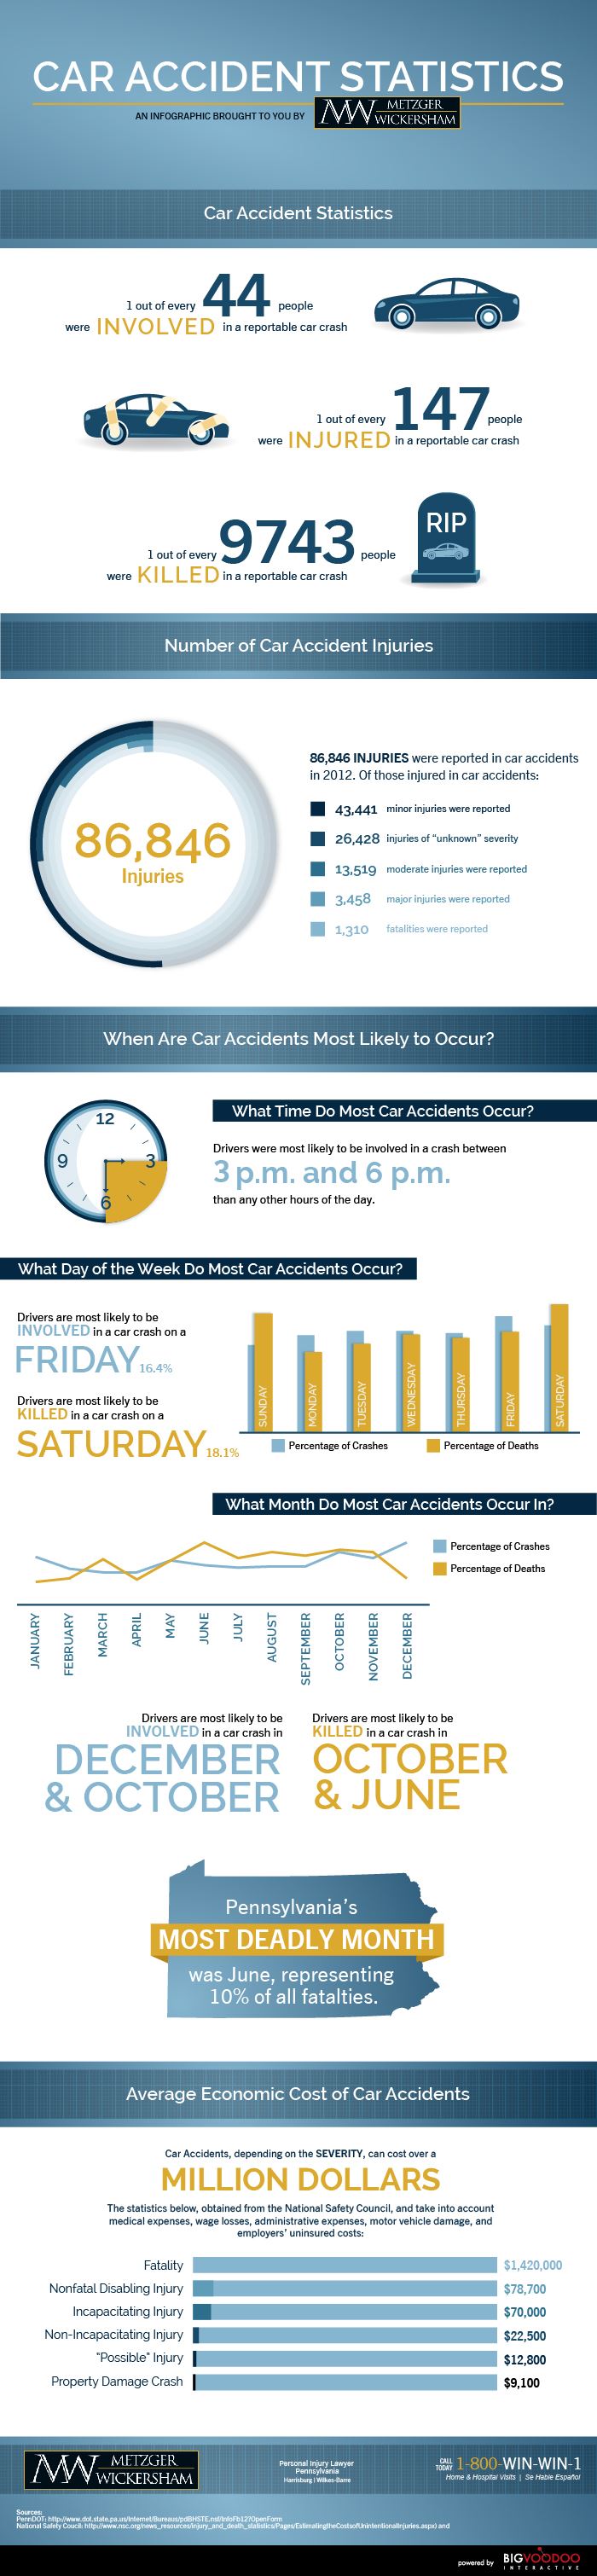 Car Accidents in Pennsylvania Statistic by Metzger Wickersham